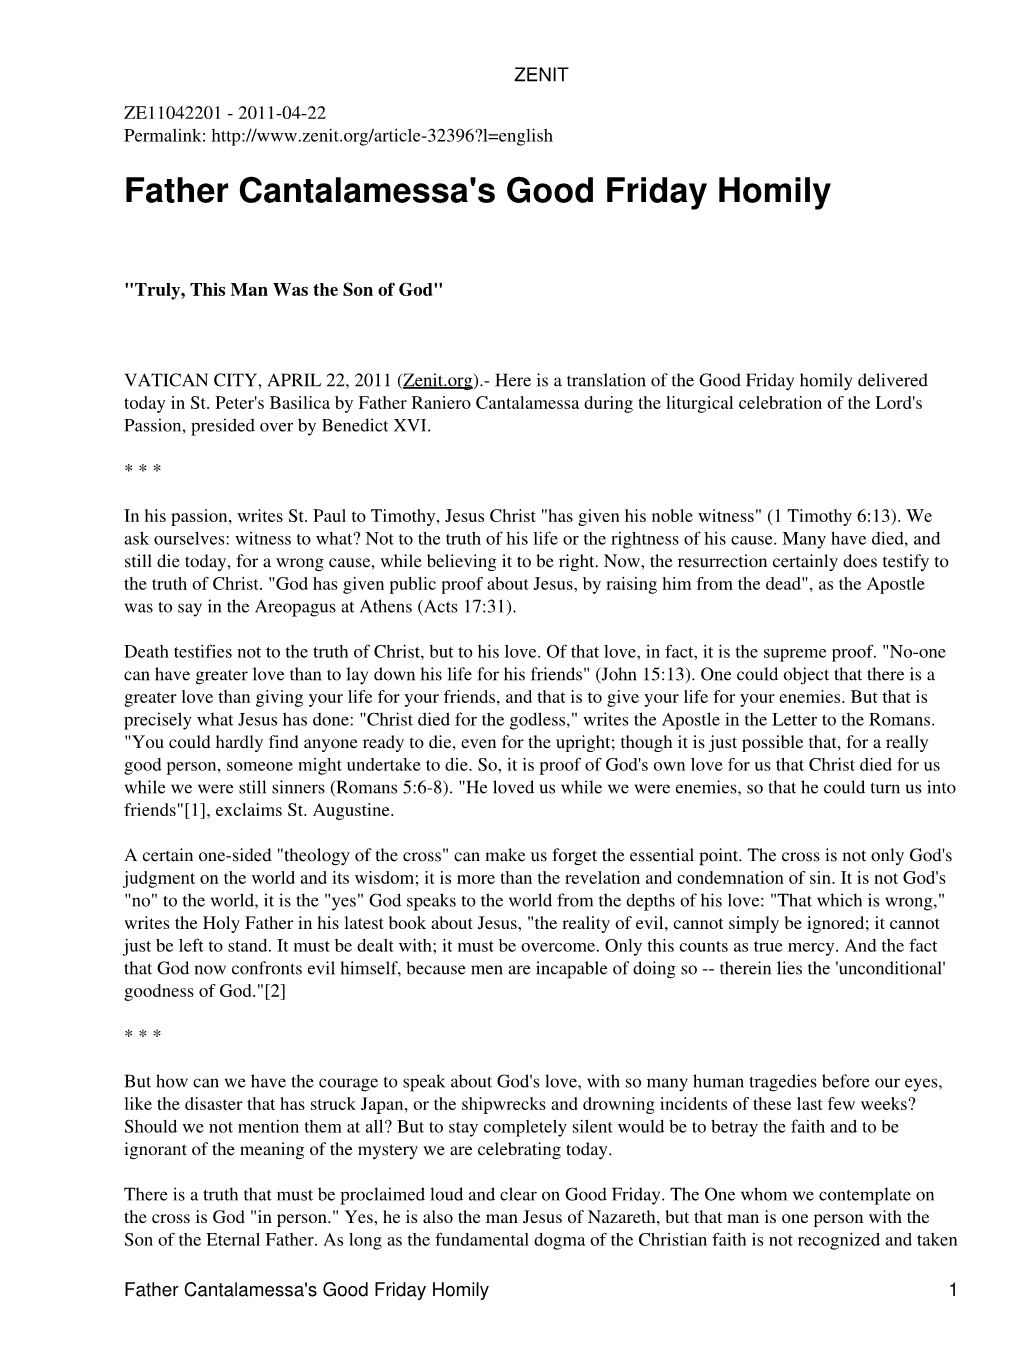 Father Cantalamessa's Good Friday Homily